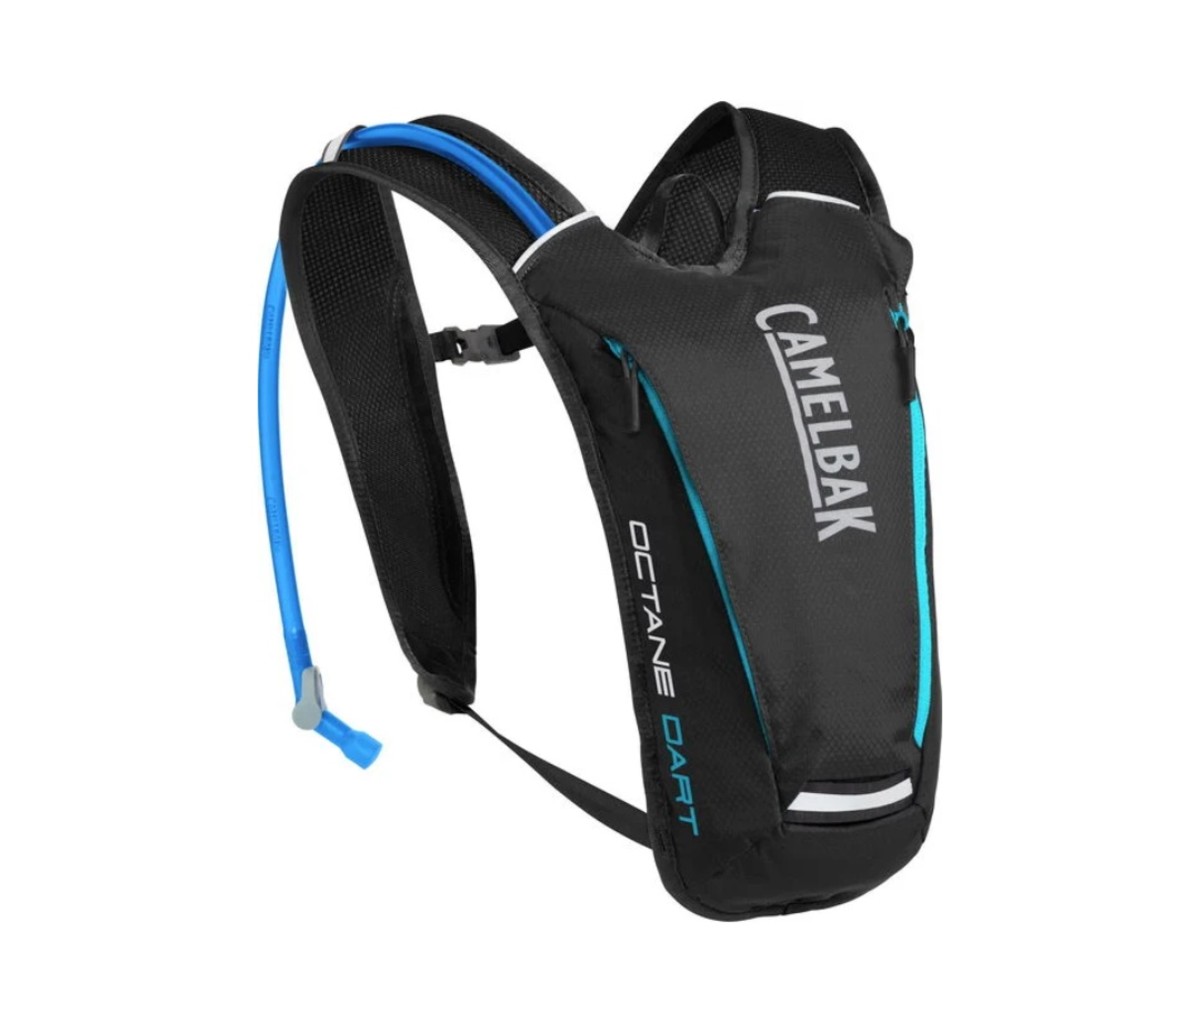 Strap on the Octane hydration pack from CamelBak to sip water on the go.